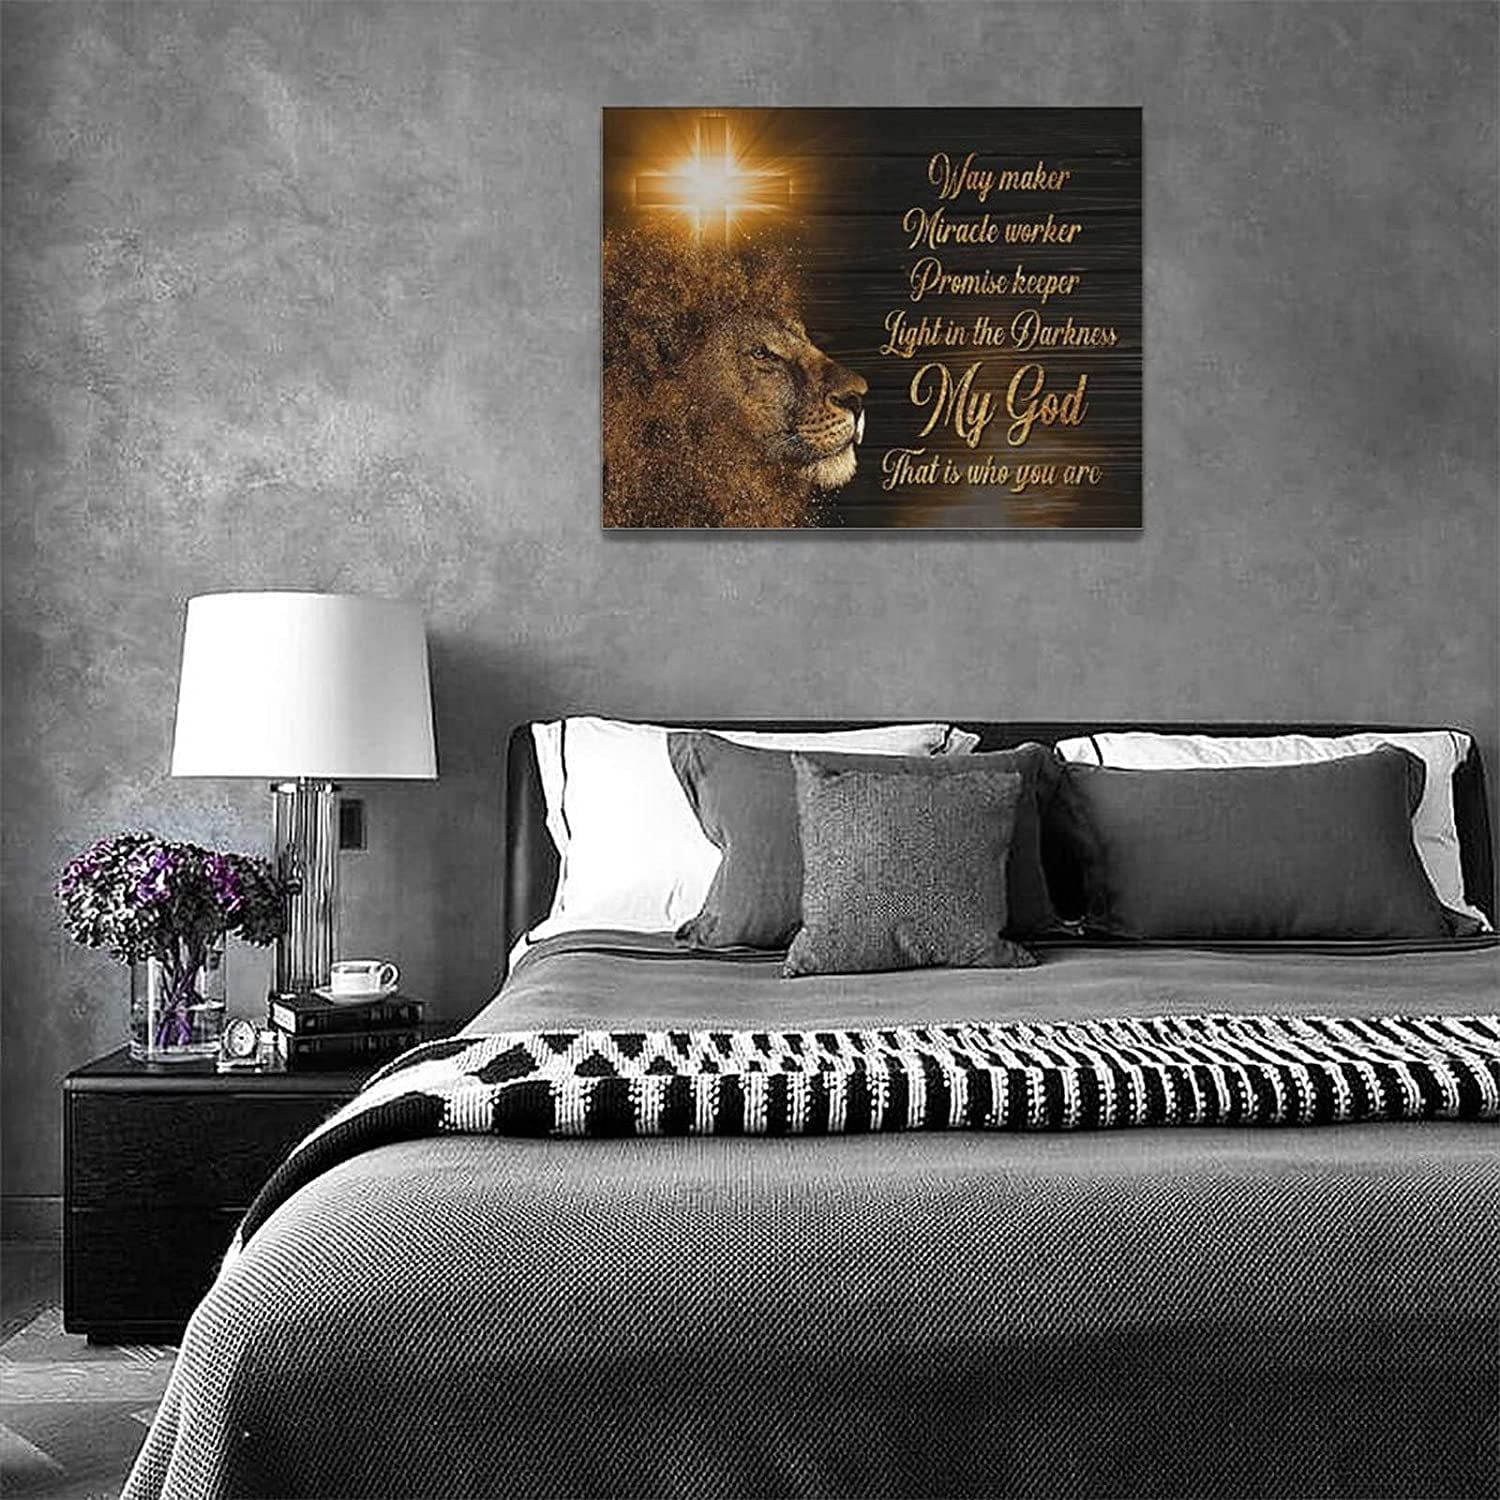 Lion of Judah Wall Art Shiny Lion Christian Religious Painting Canvas Wall  Decor Lion Quotes Painting Print Way Maker Artworks Modern Home Framed for  Living Room Bedroom Bathroom 12"x16"